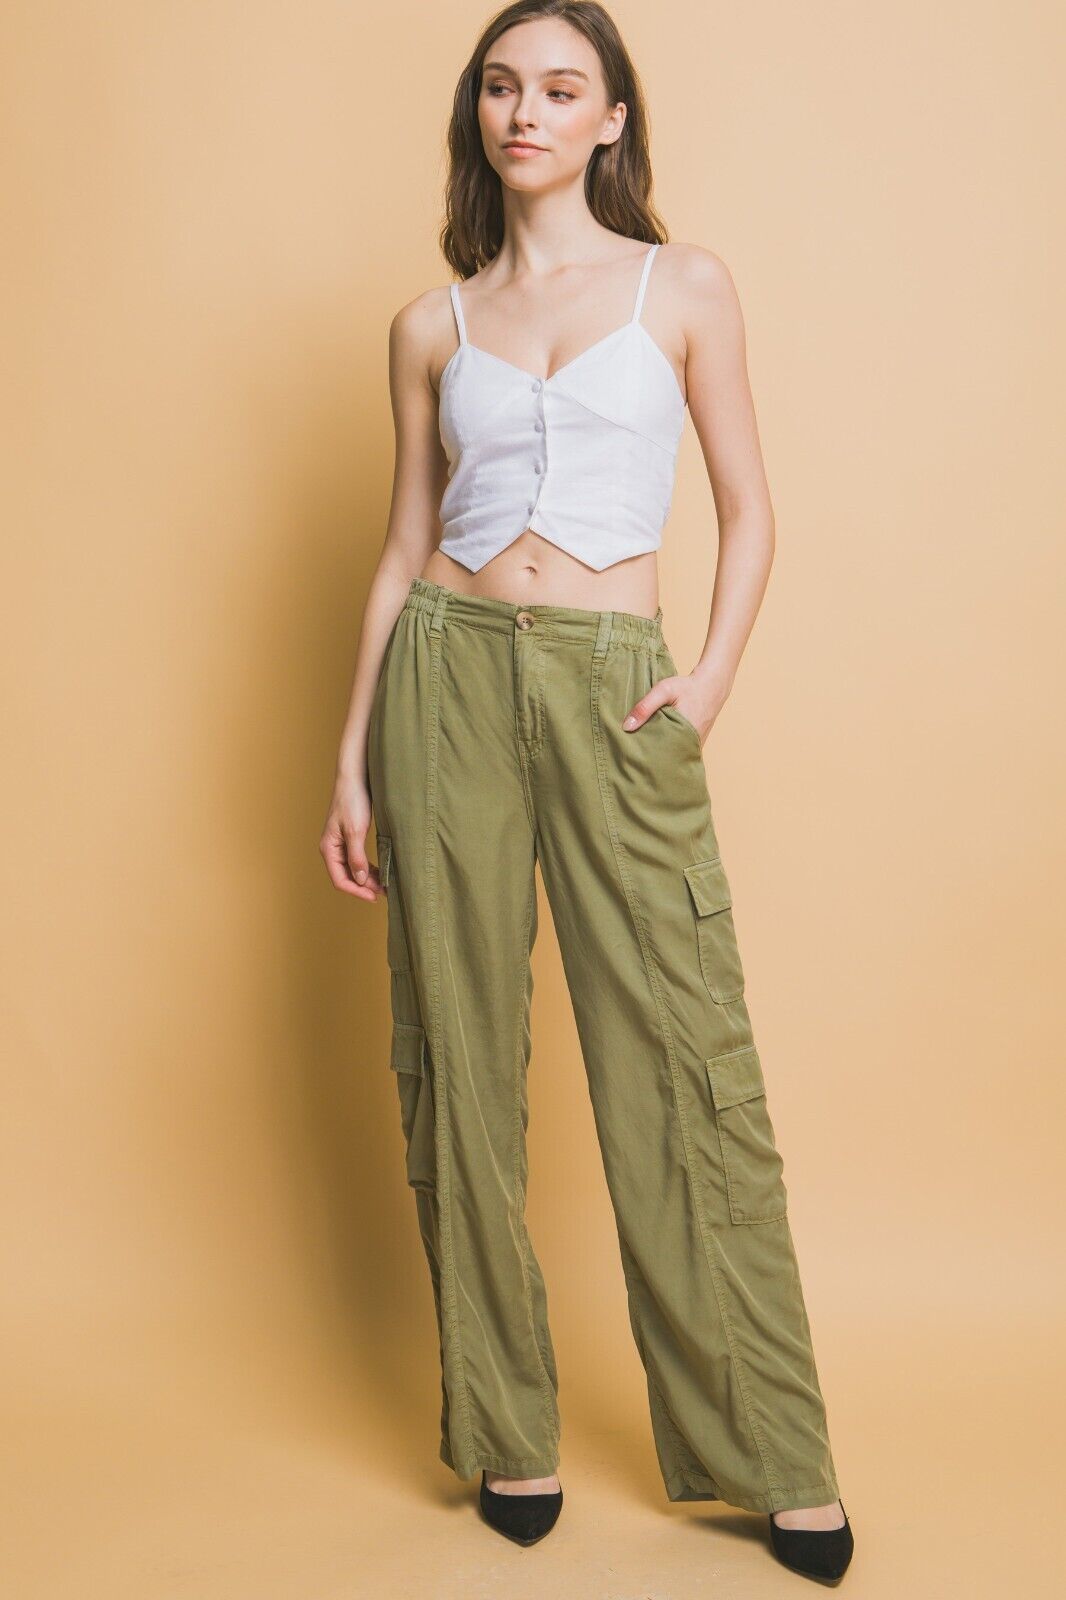 Primary image for Women's Olive Full Length Tencel Pants With Cargo Pockets (S)